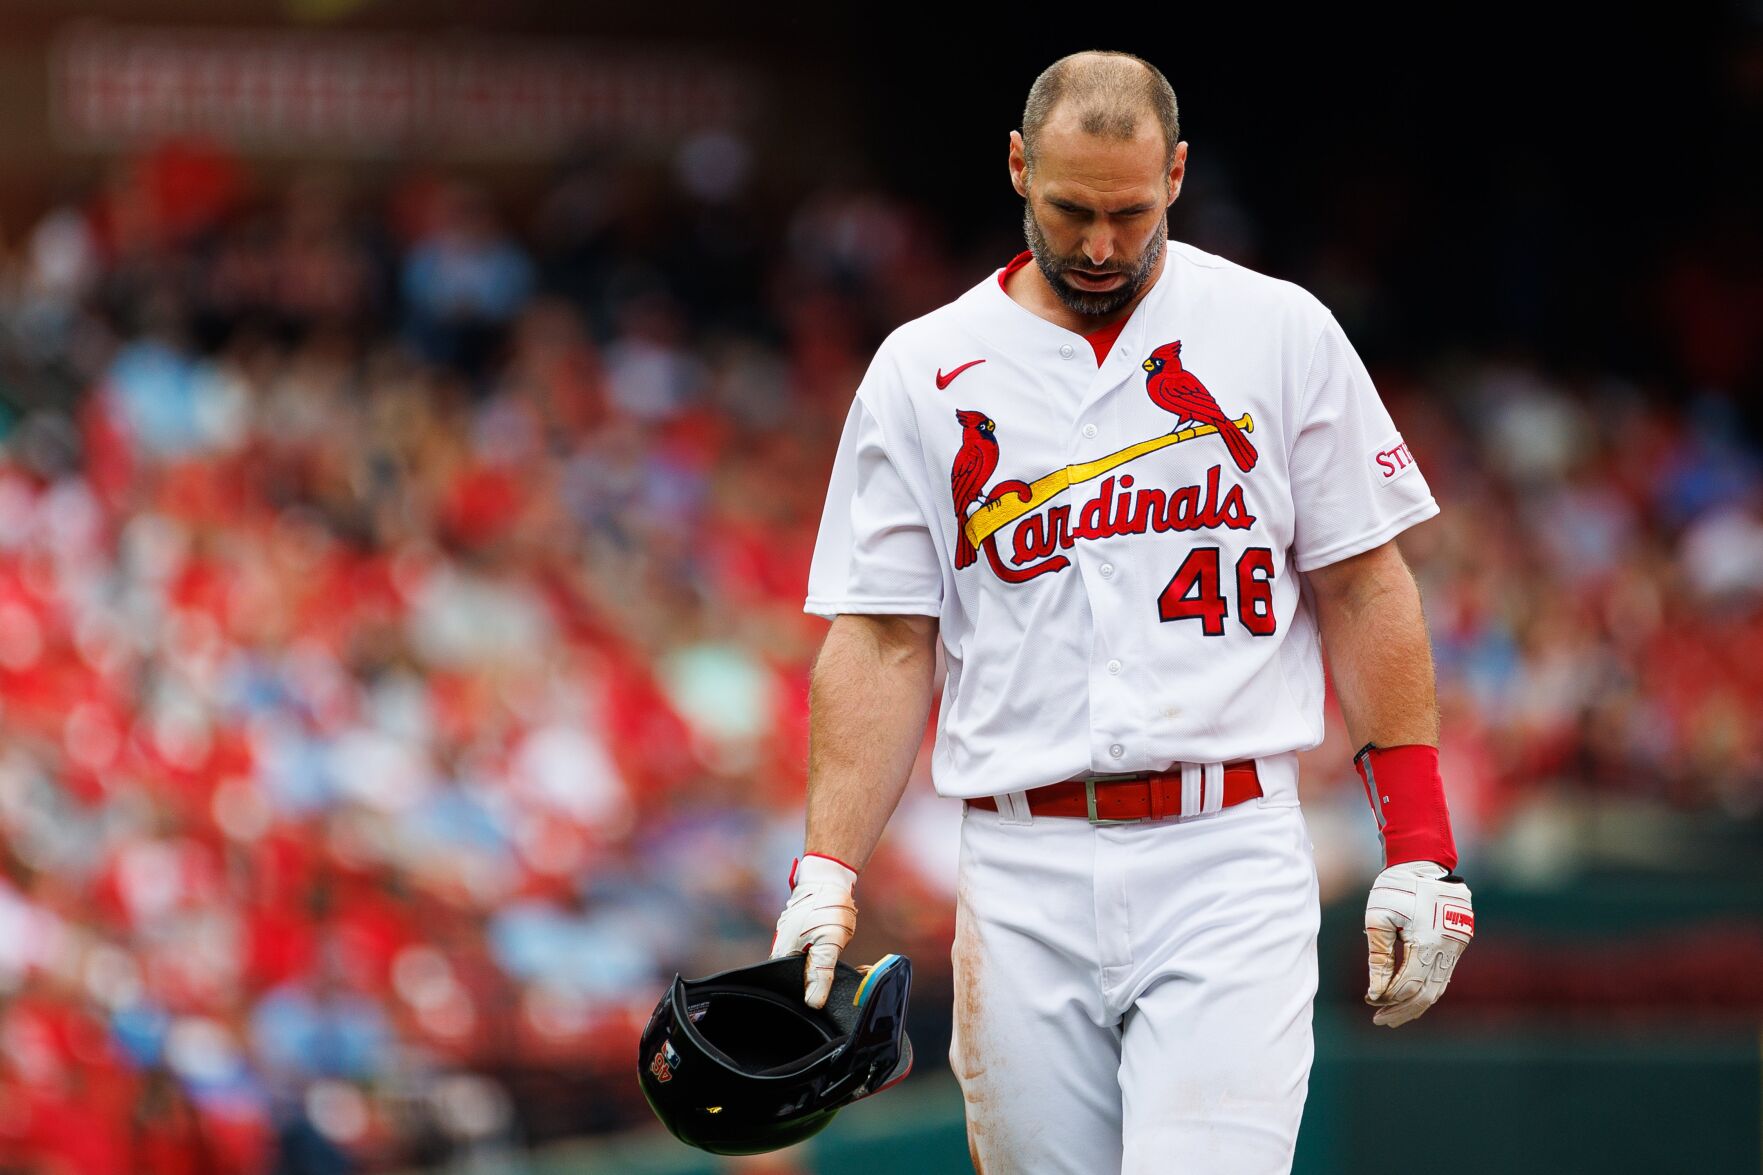 We have to be perfect to win Cardinals are out of the race until they outrun their mistakes